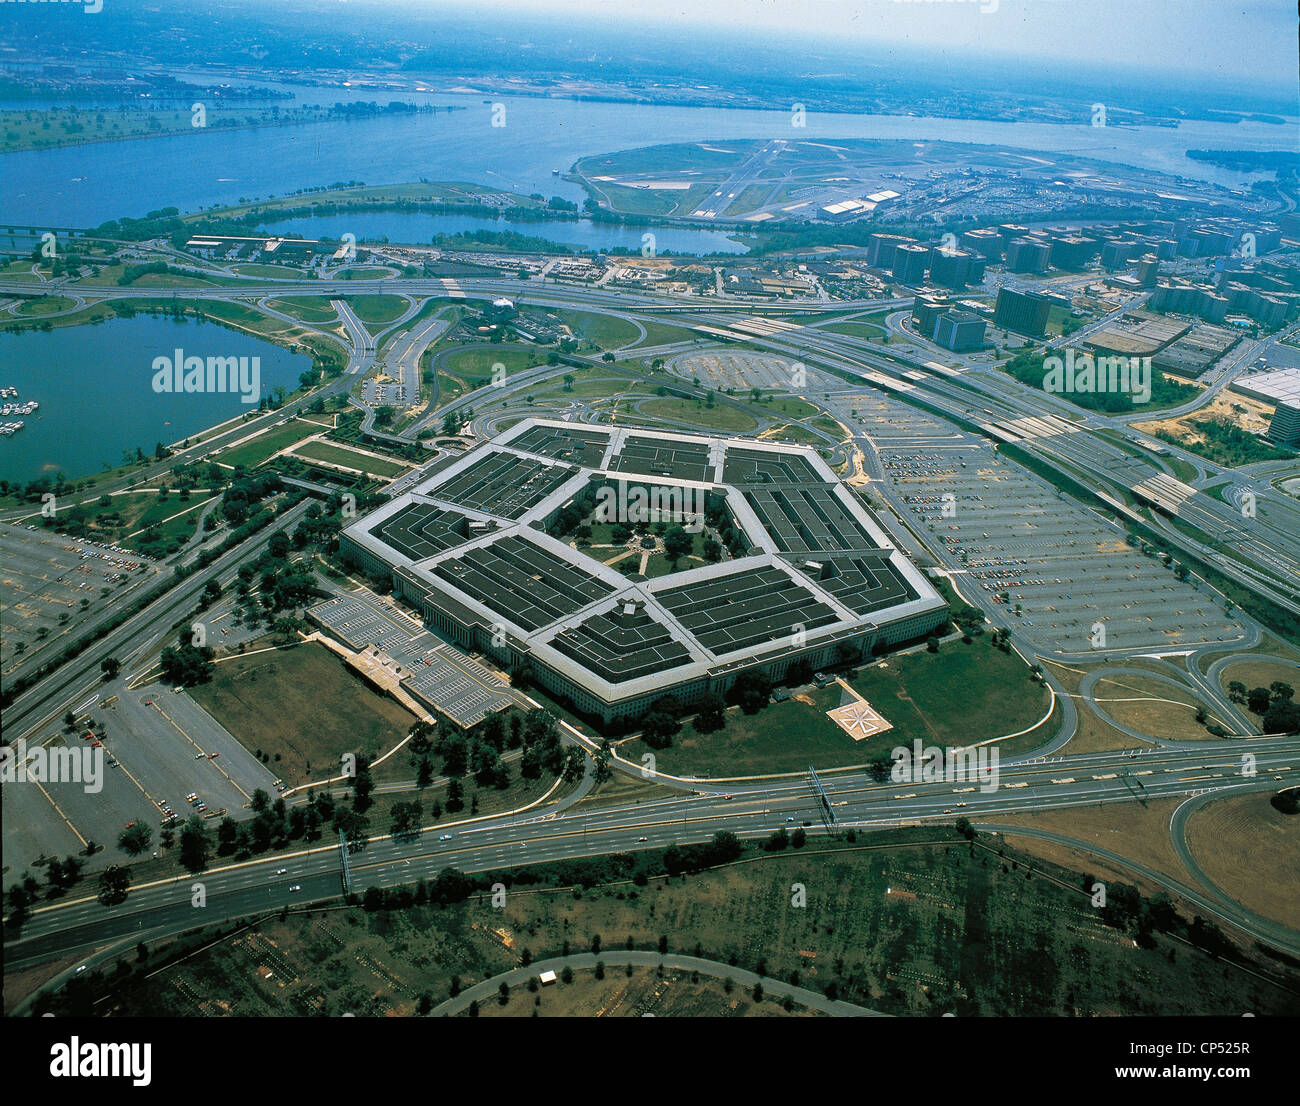 United States of America - Distric of Columbia - Washington, the Pentagon with the Potomac River and the airport. Aerial view. Stock Photo